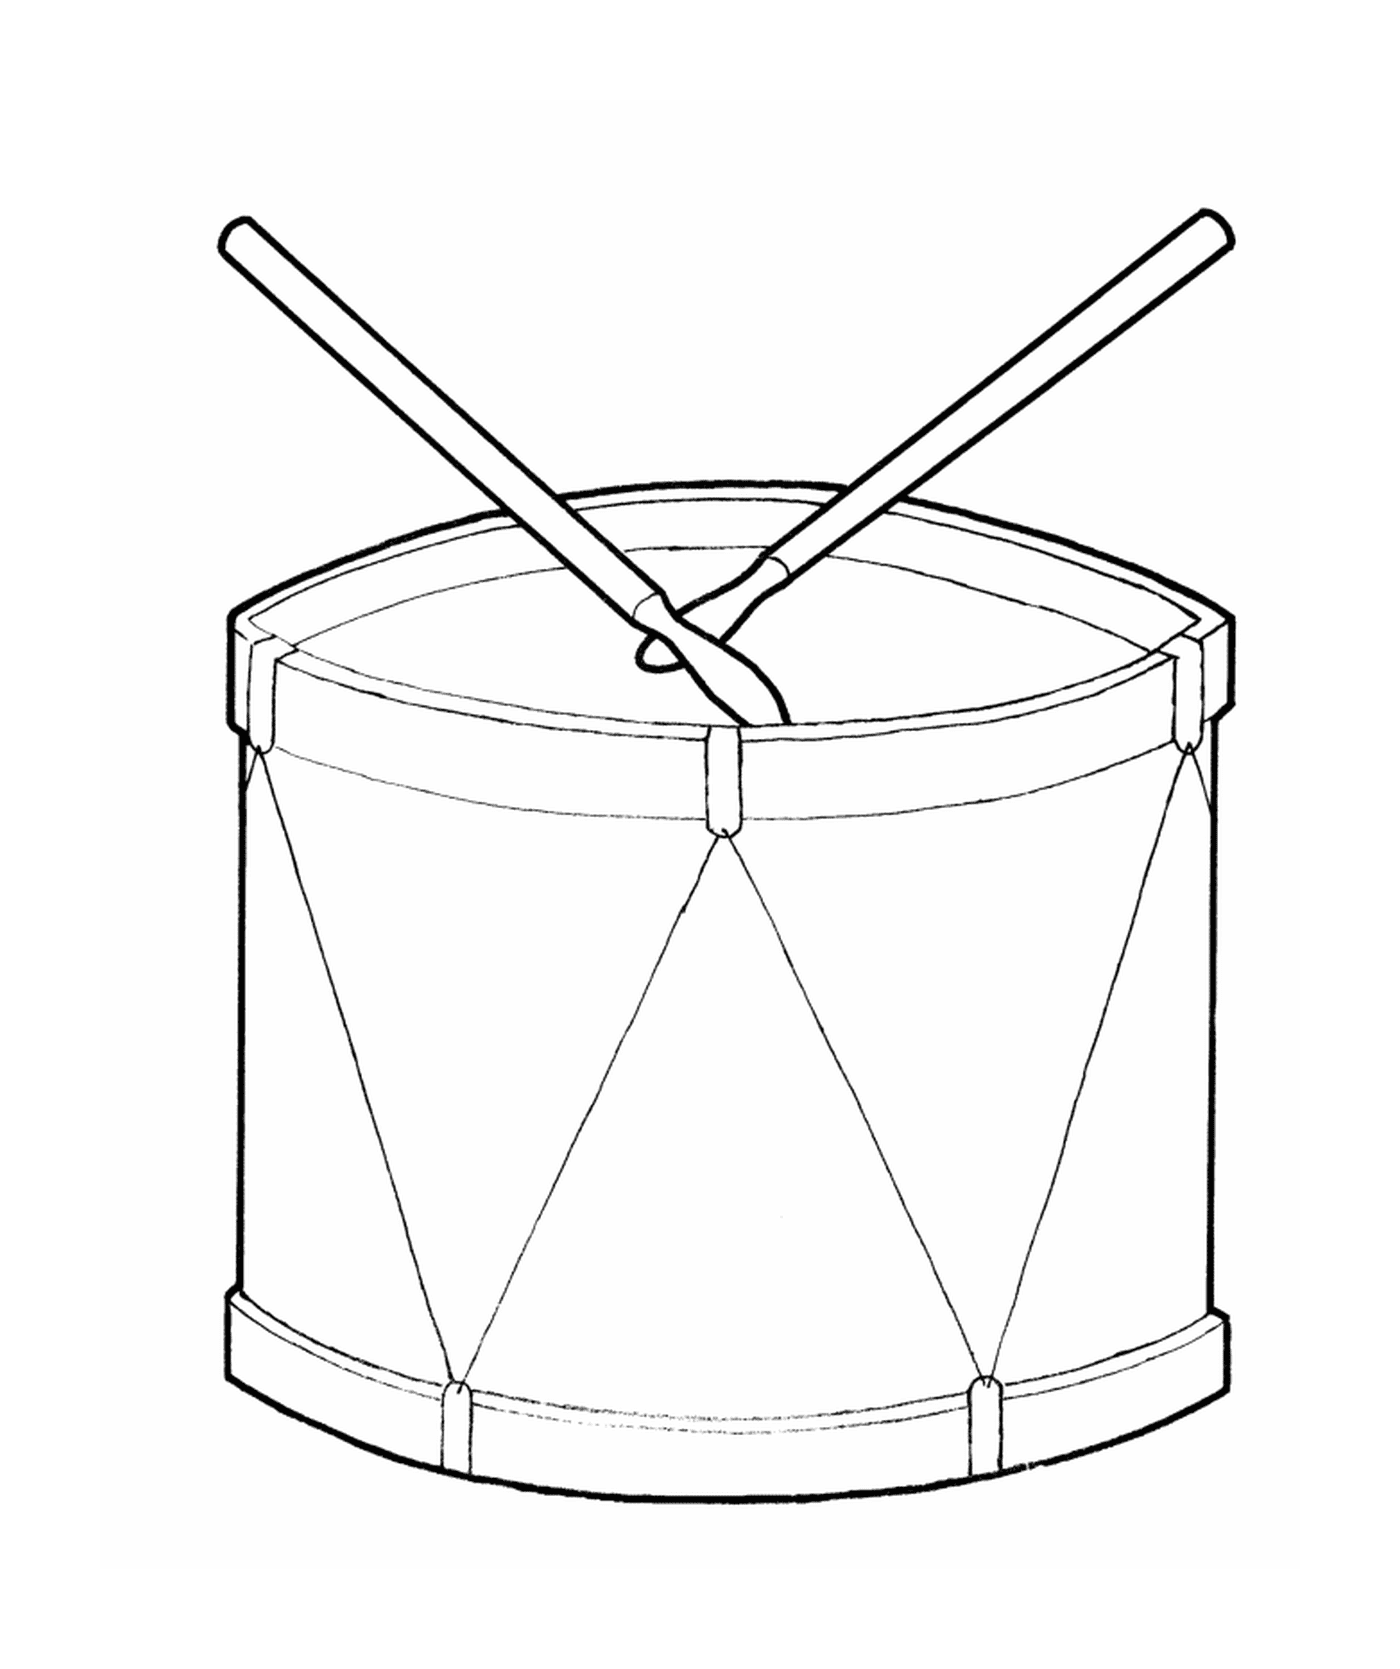  A drum with two wooden sticks 